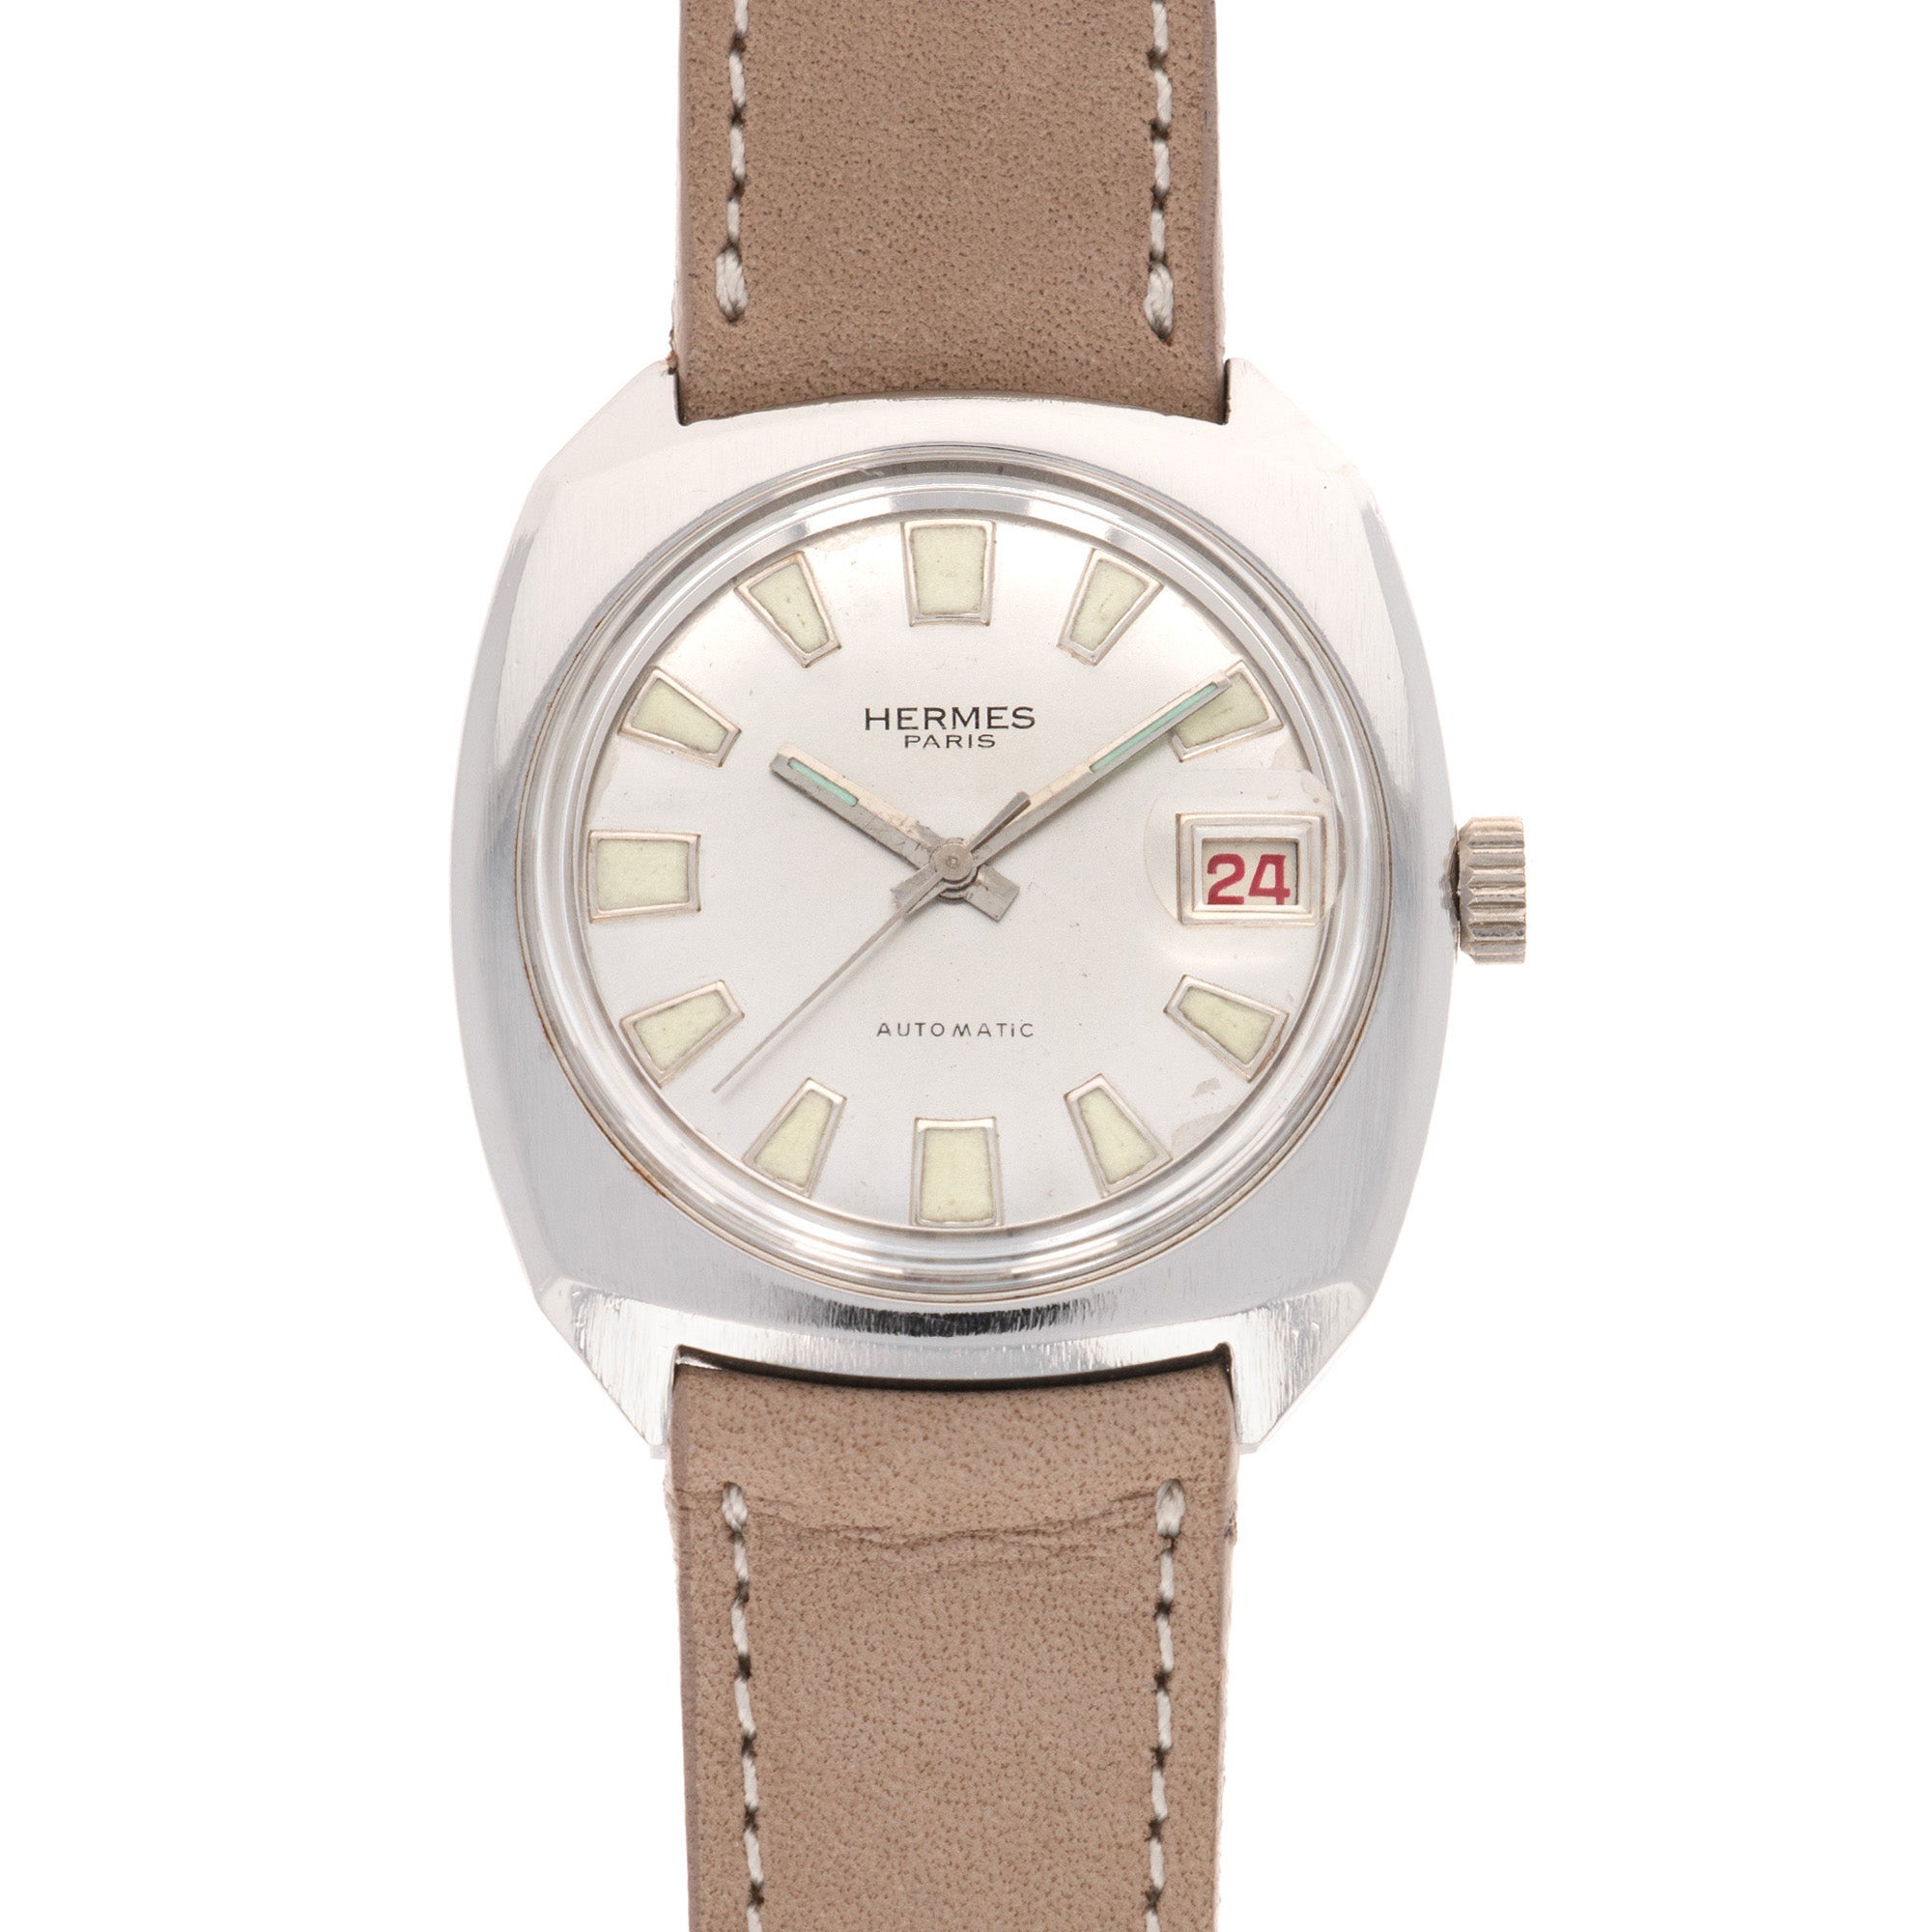 Hermes - Hermes Steel Automatic Watch, 1960s - The Keystone Watches